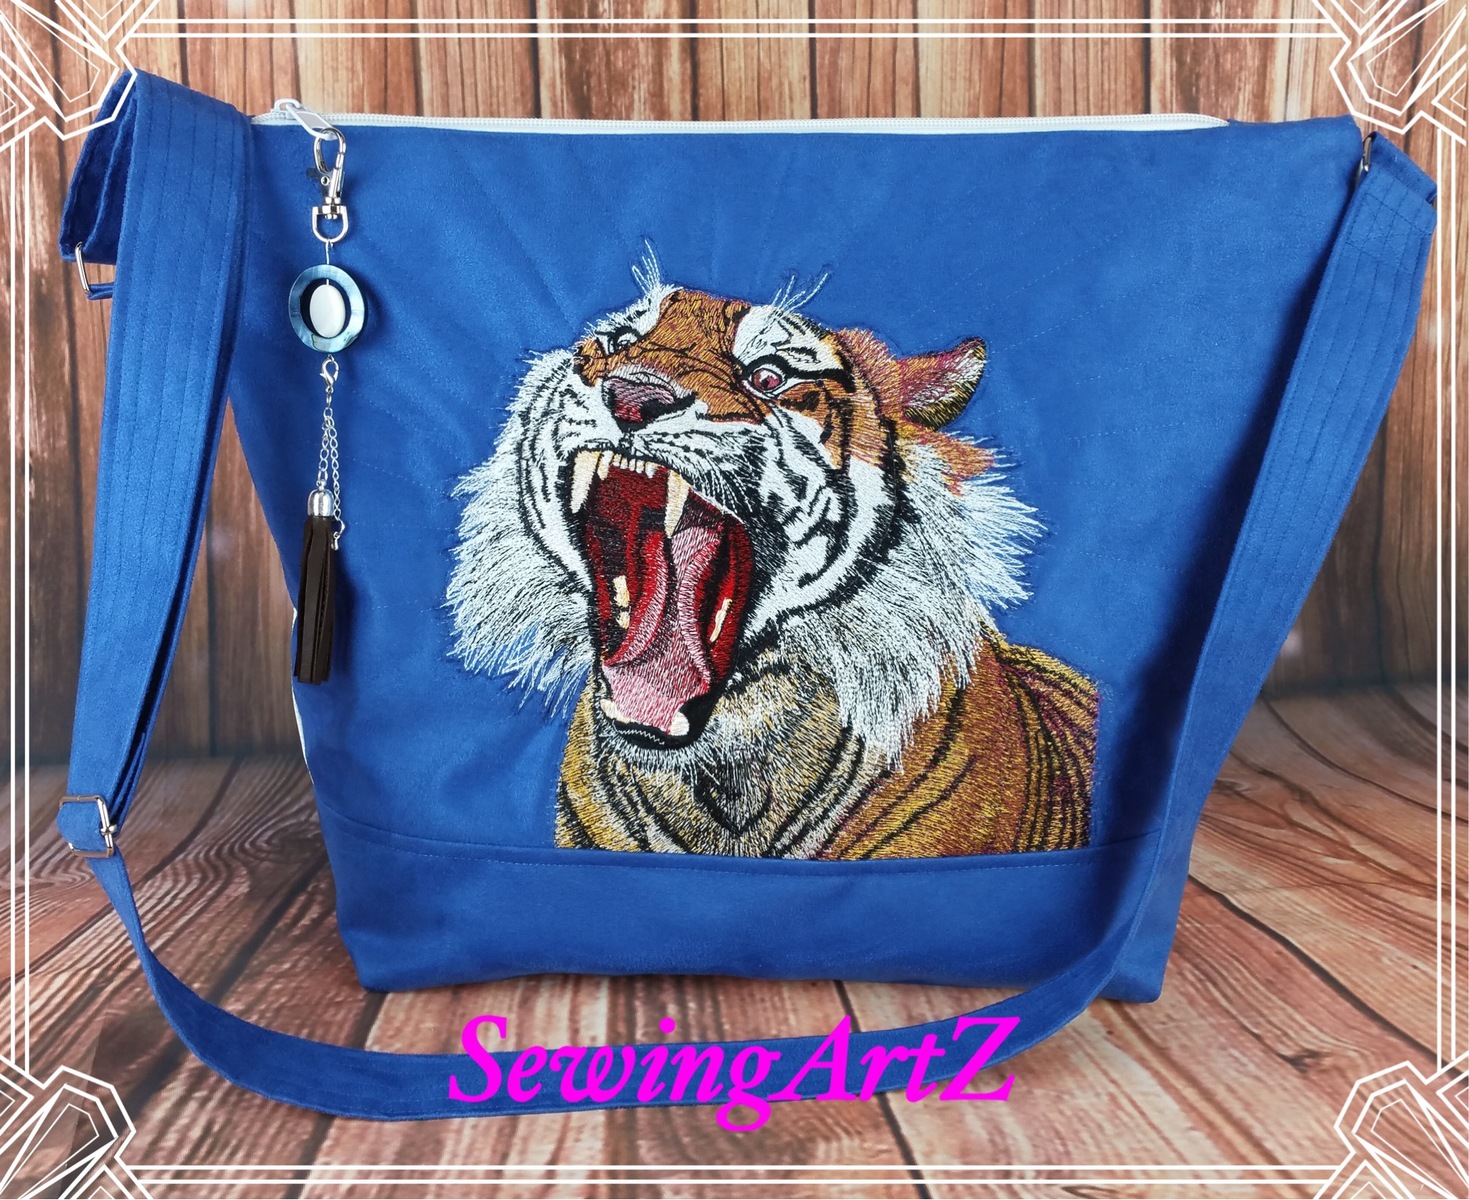 Bag with angry tiger free embroidery design